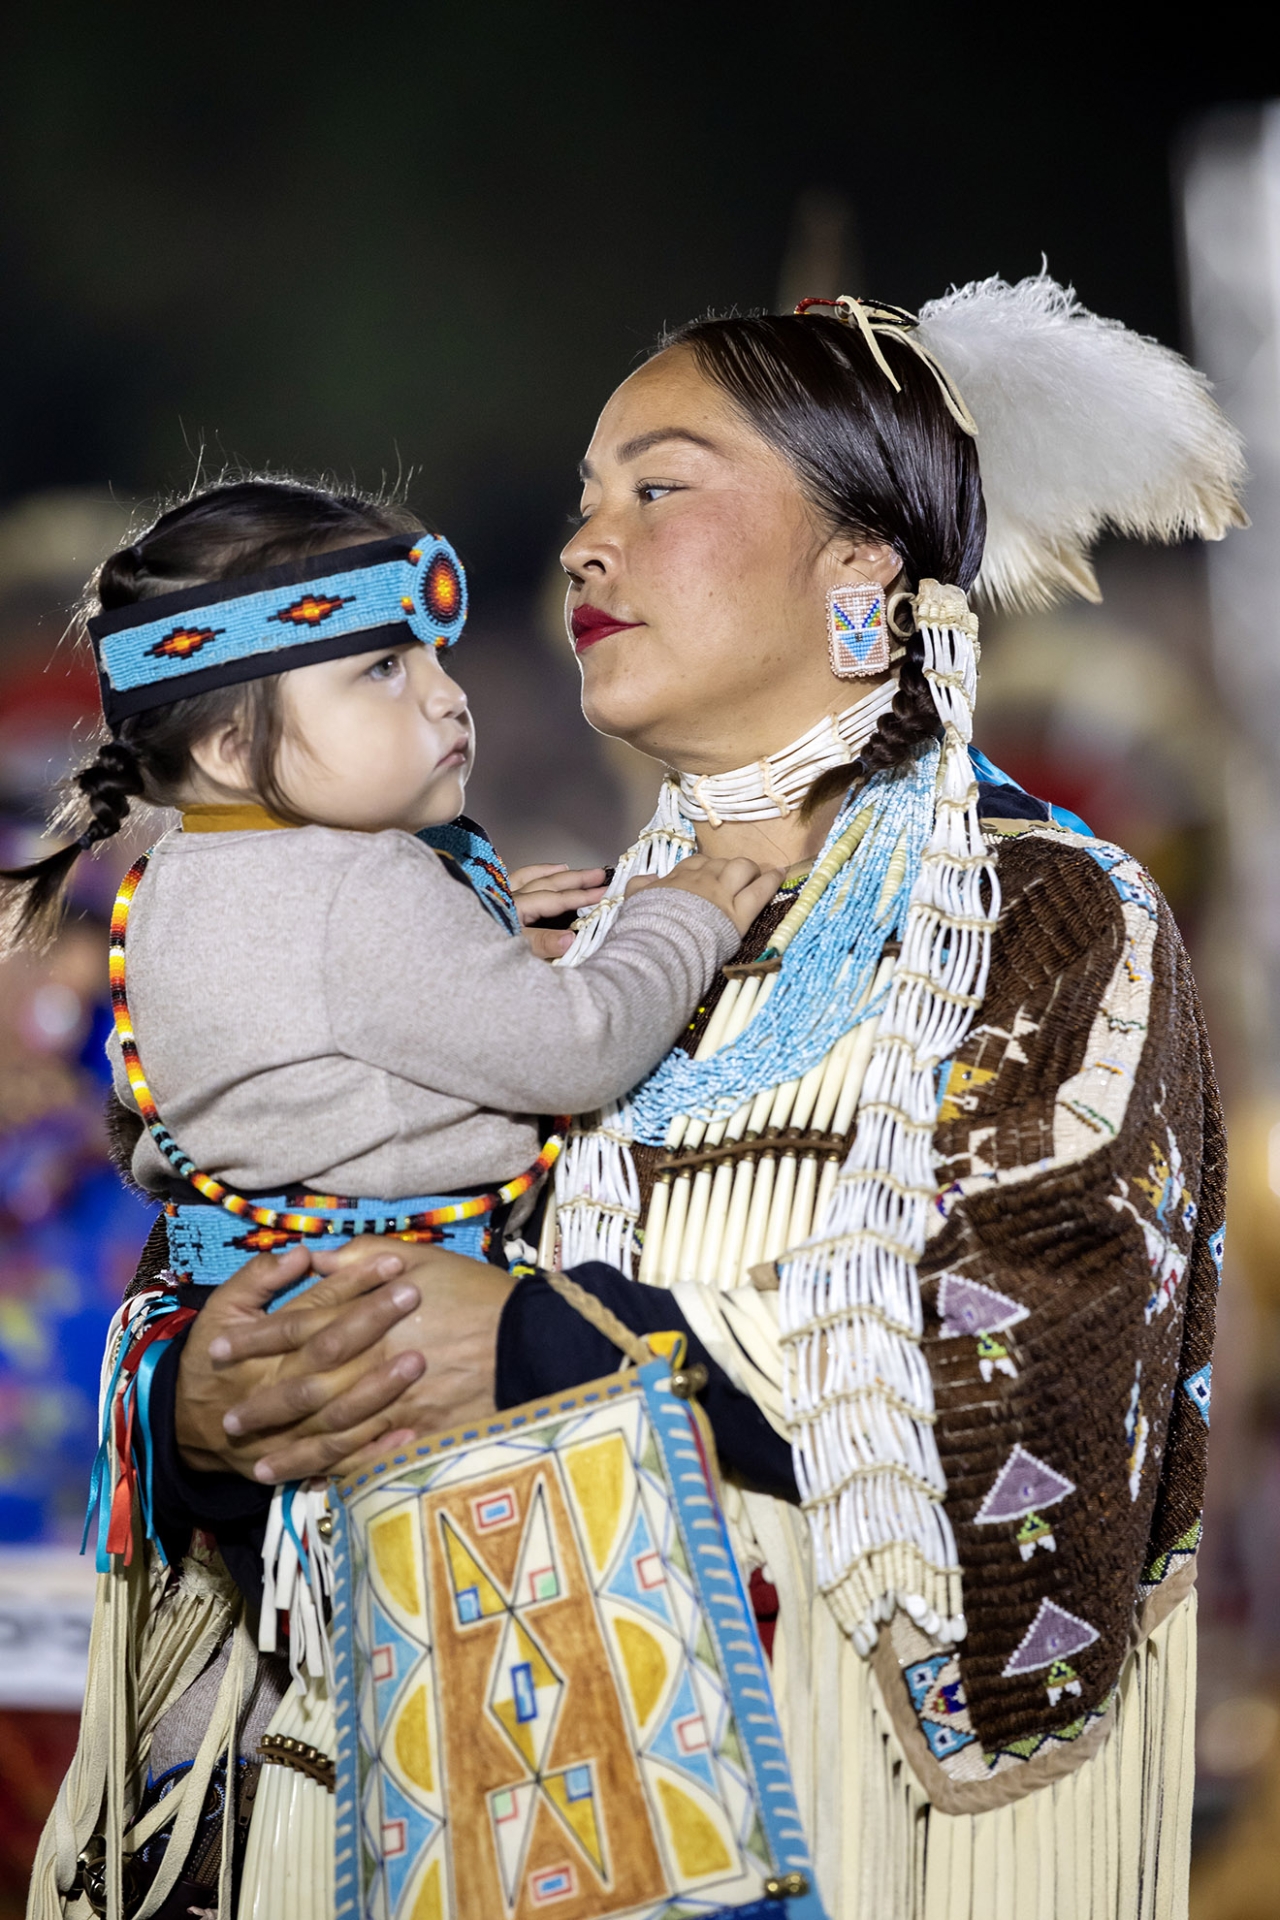 Pow Wow performer holding a child